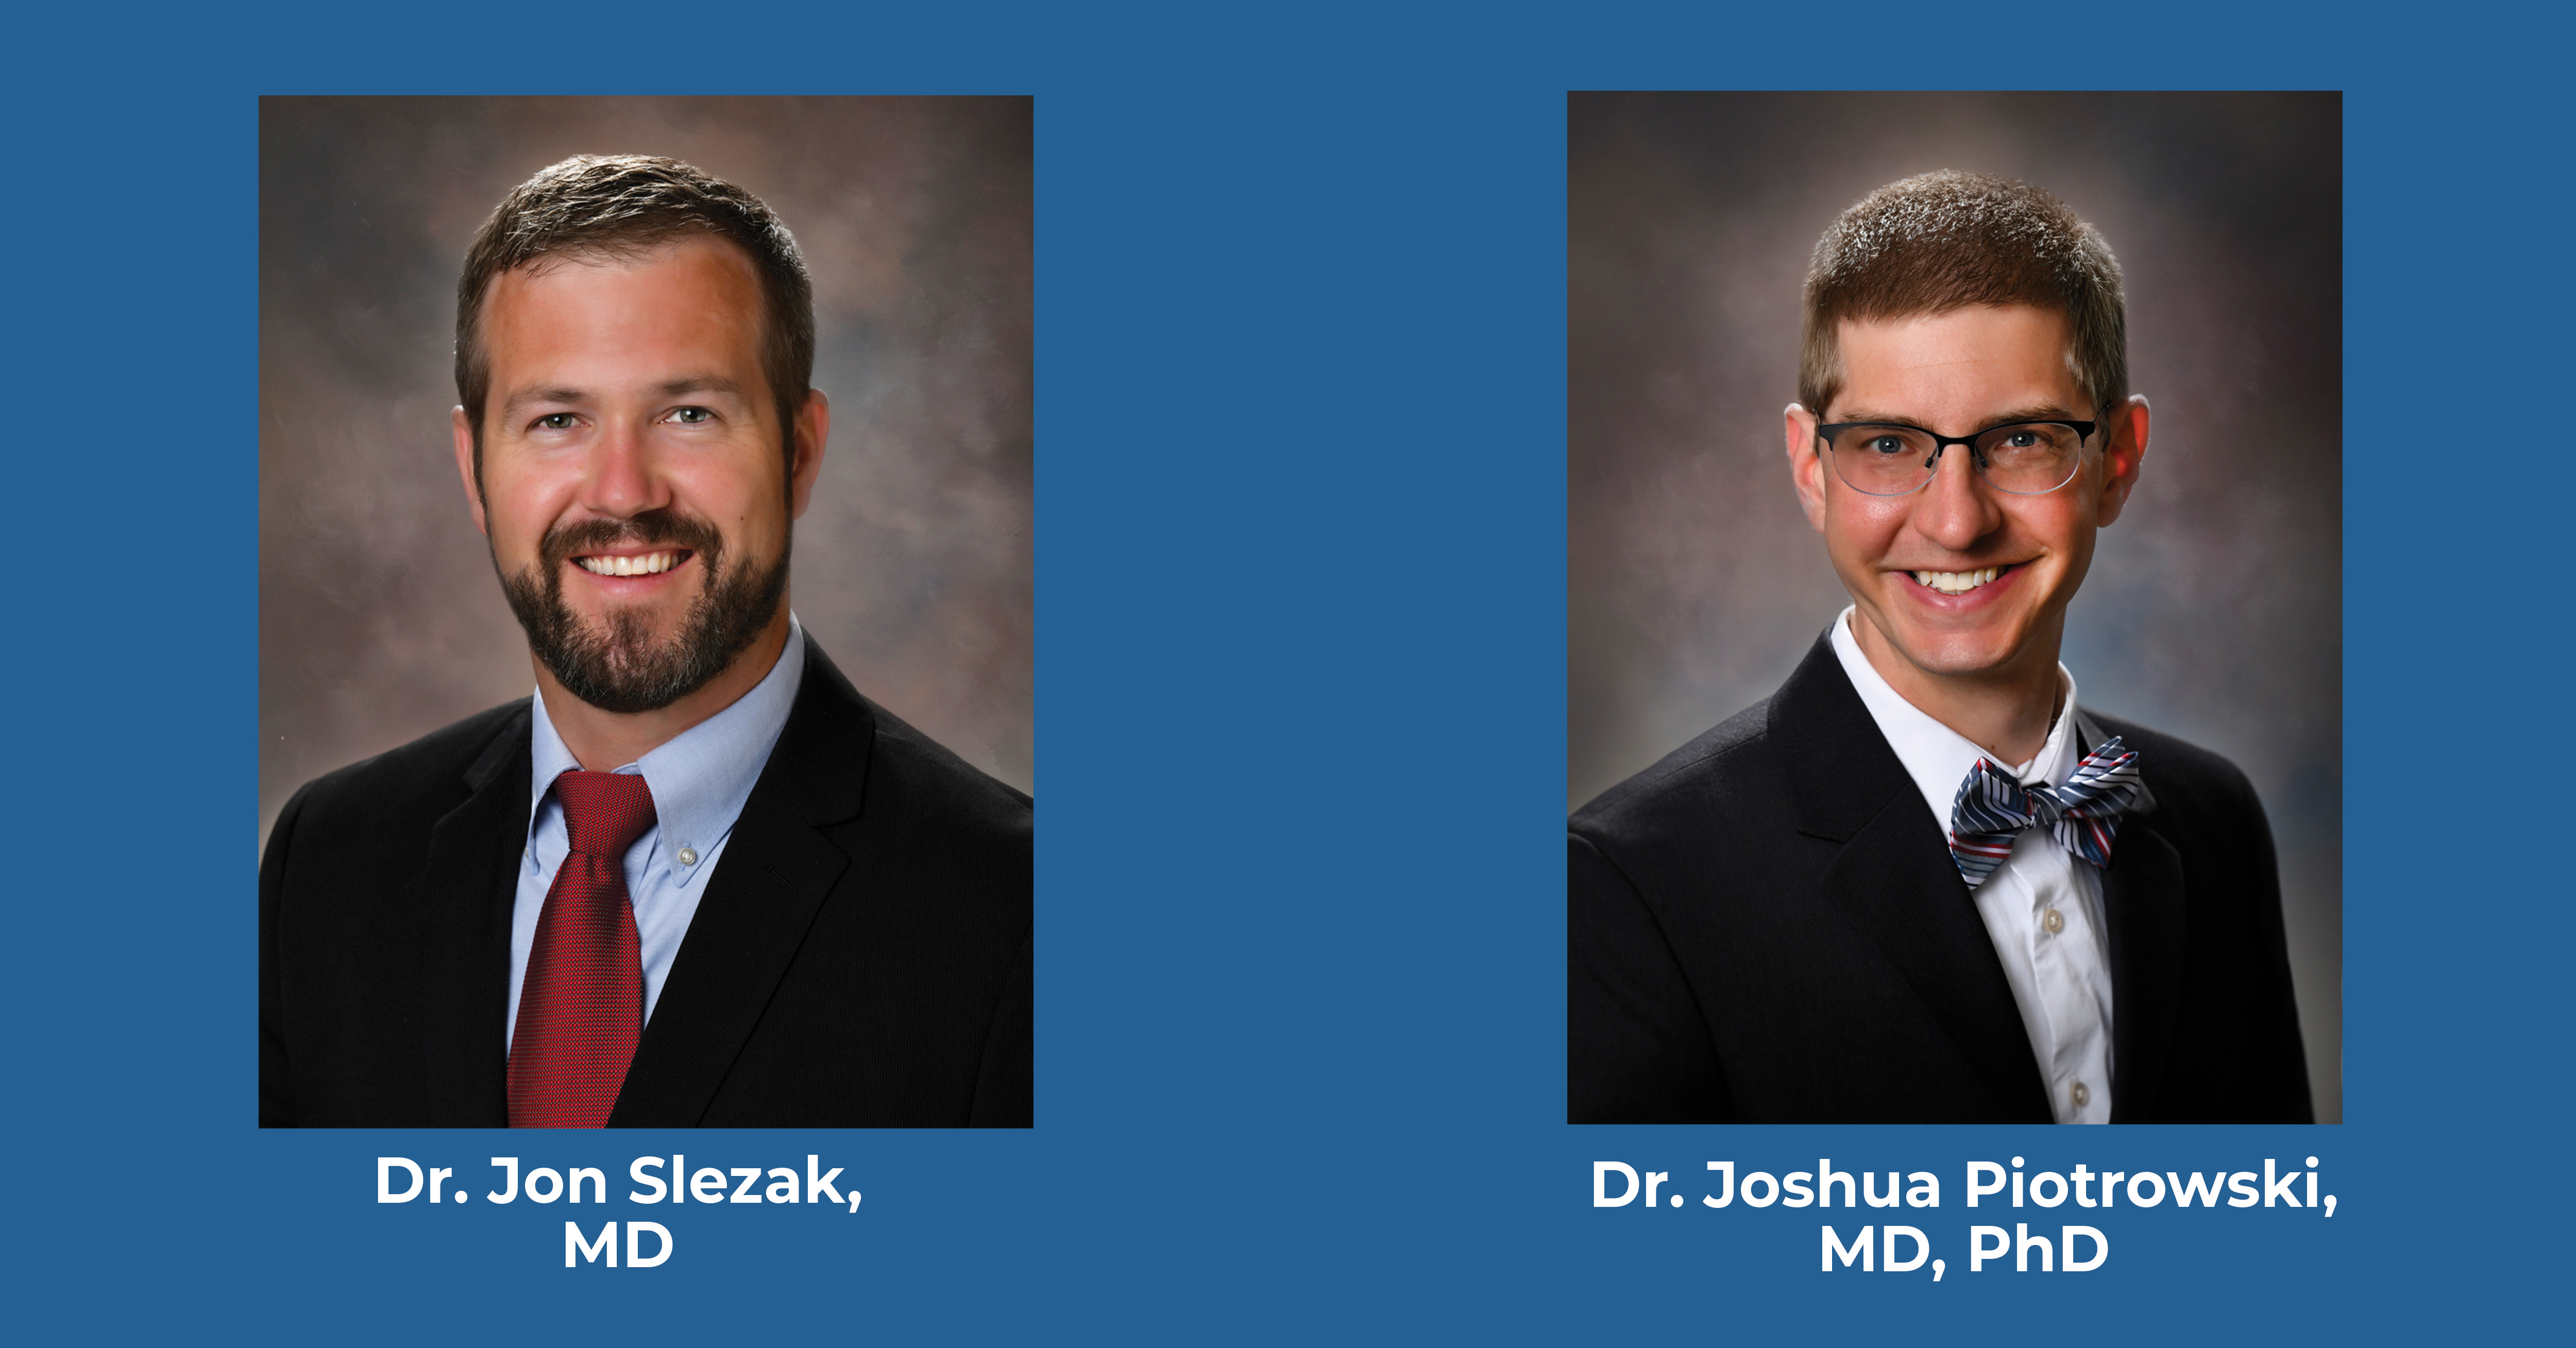 Jon Slezak, MD and Joshua Piotrowski, MD, PhD, have been named partners with BayCare Clinic.